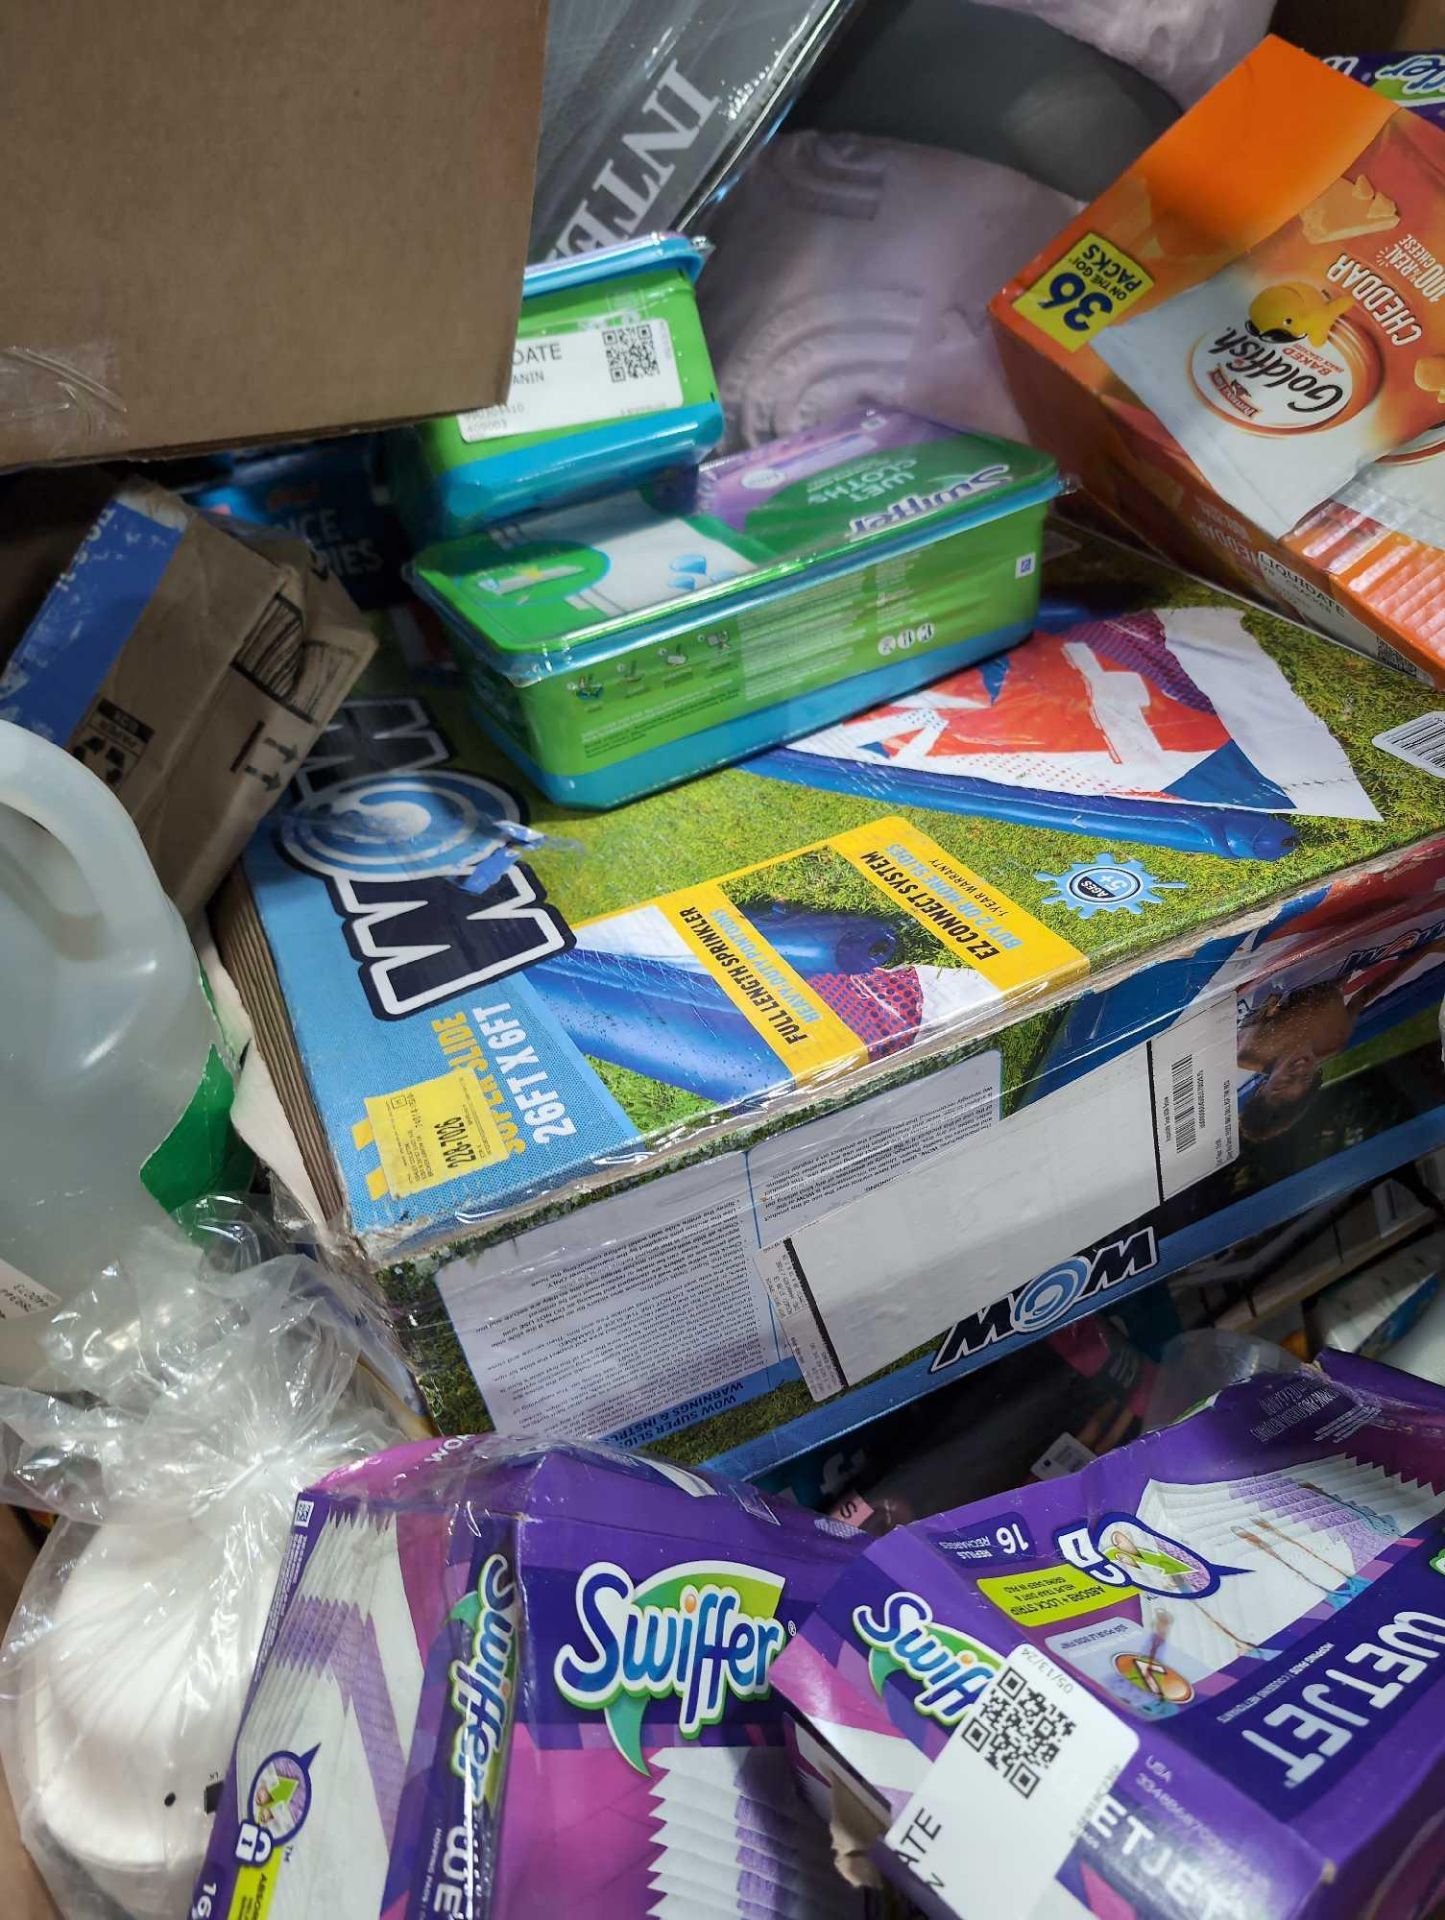 Big box store in a box, pampers, Sheets, Blanket, Intex blow up bed, swiffer wet cloths, gold fish, - Image 11 of 20